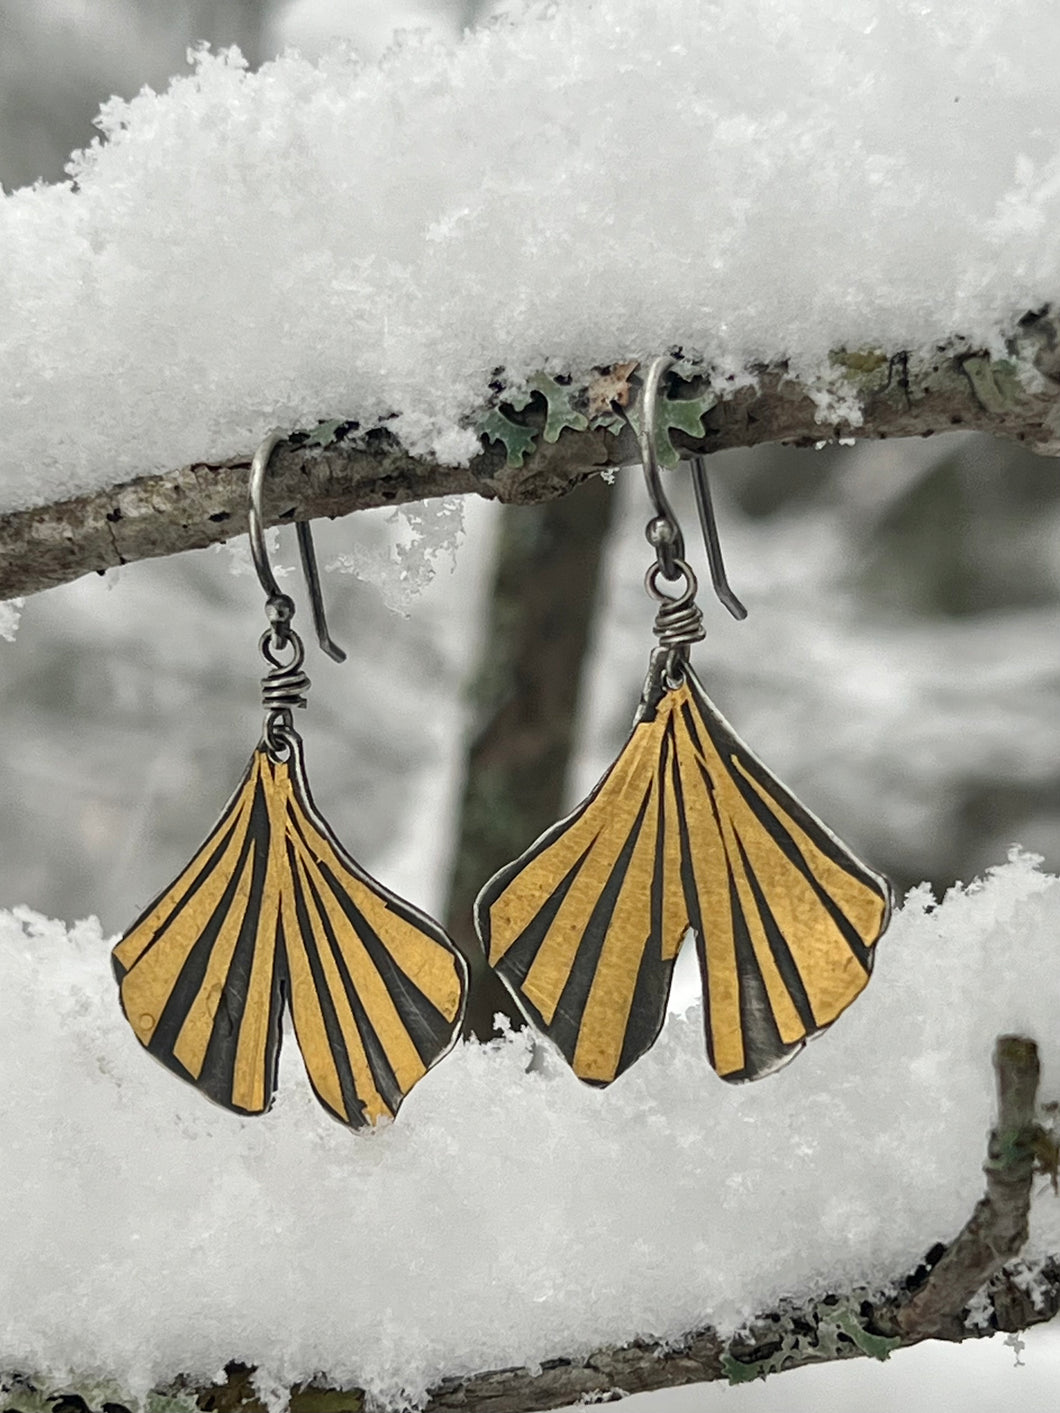 Keum-boo Gingko Leaf Earrings in 24K Gold and Silver (Small)